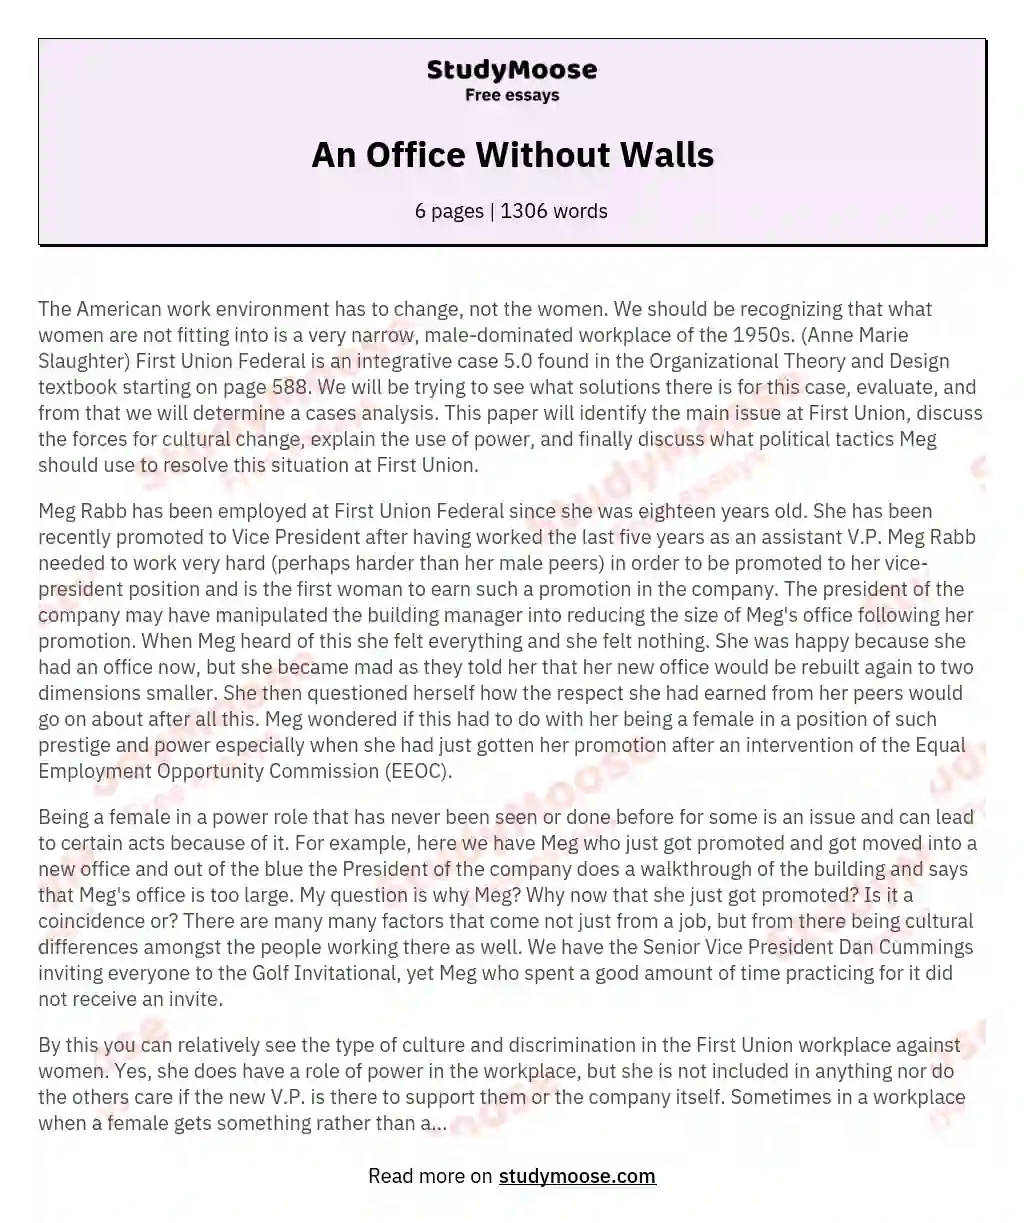 An Office Without Walls essay